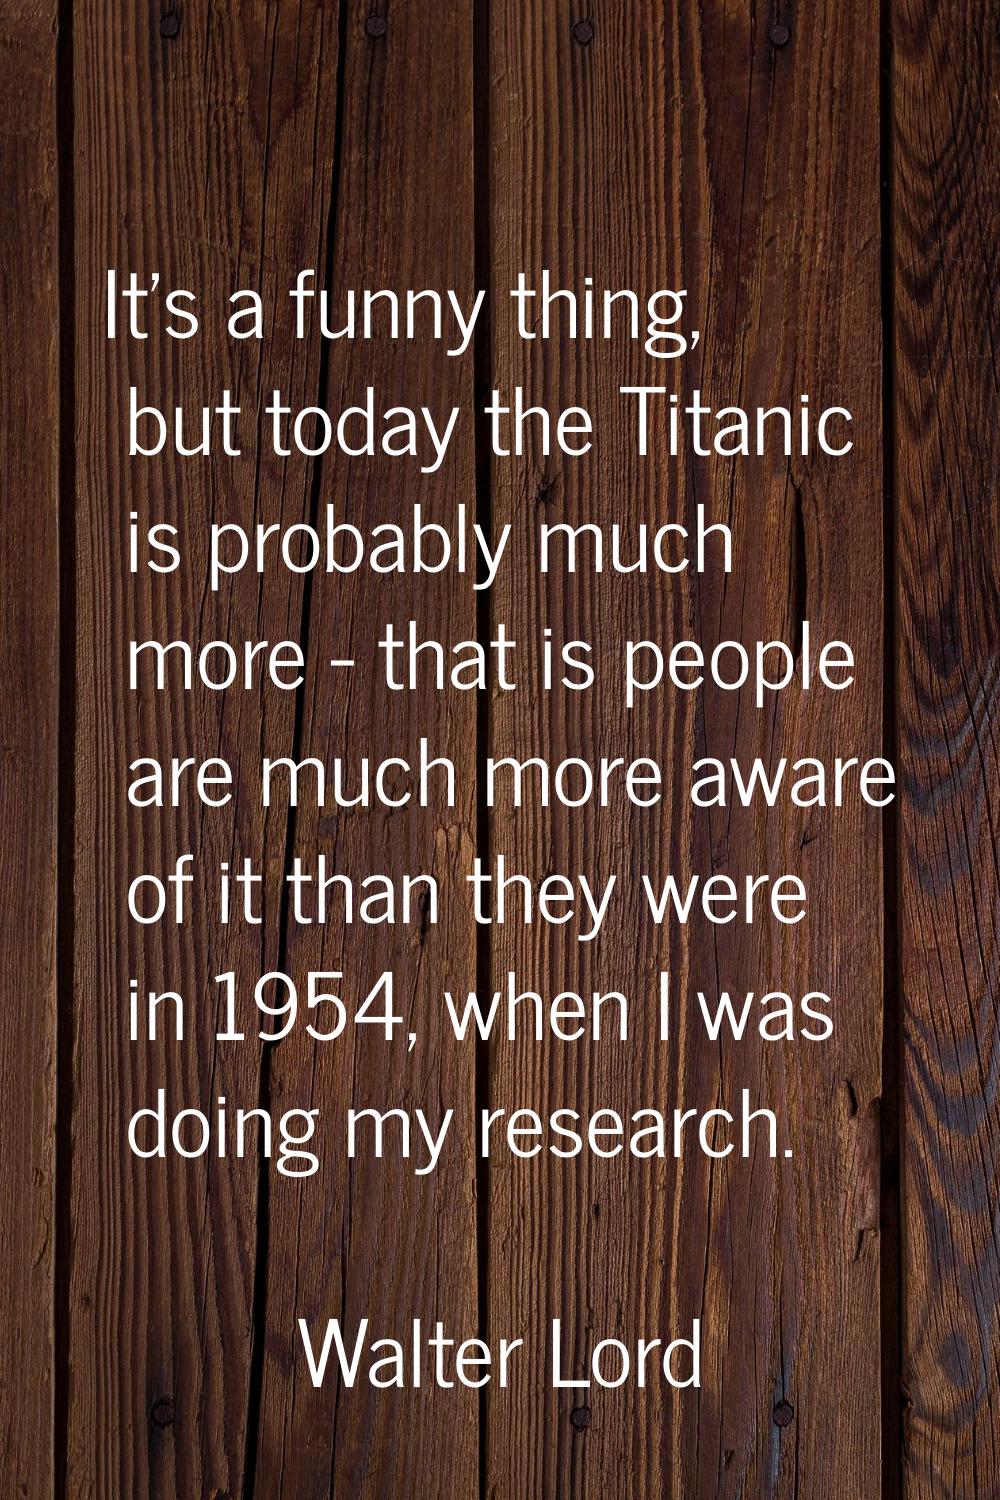 It's a funny thing, but today the Titanic is probably much more - that is people are much more awar